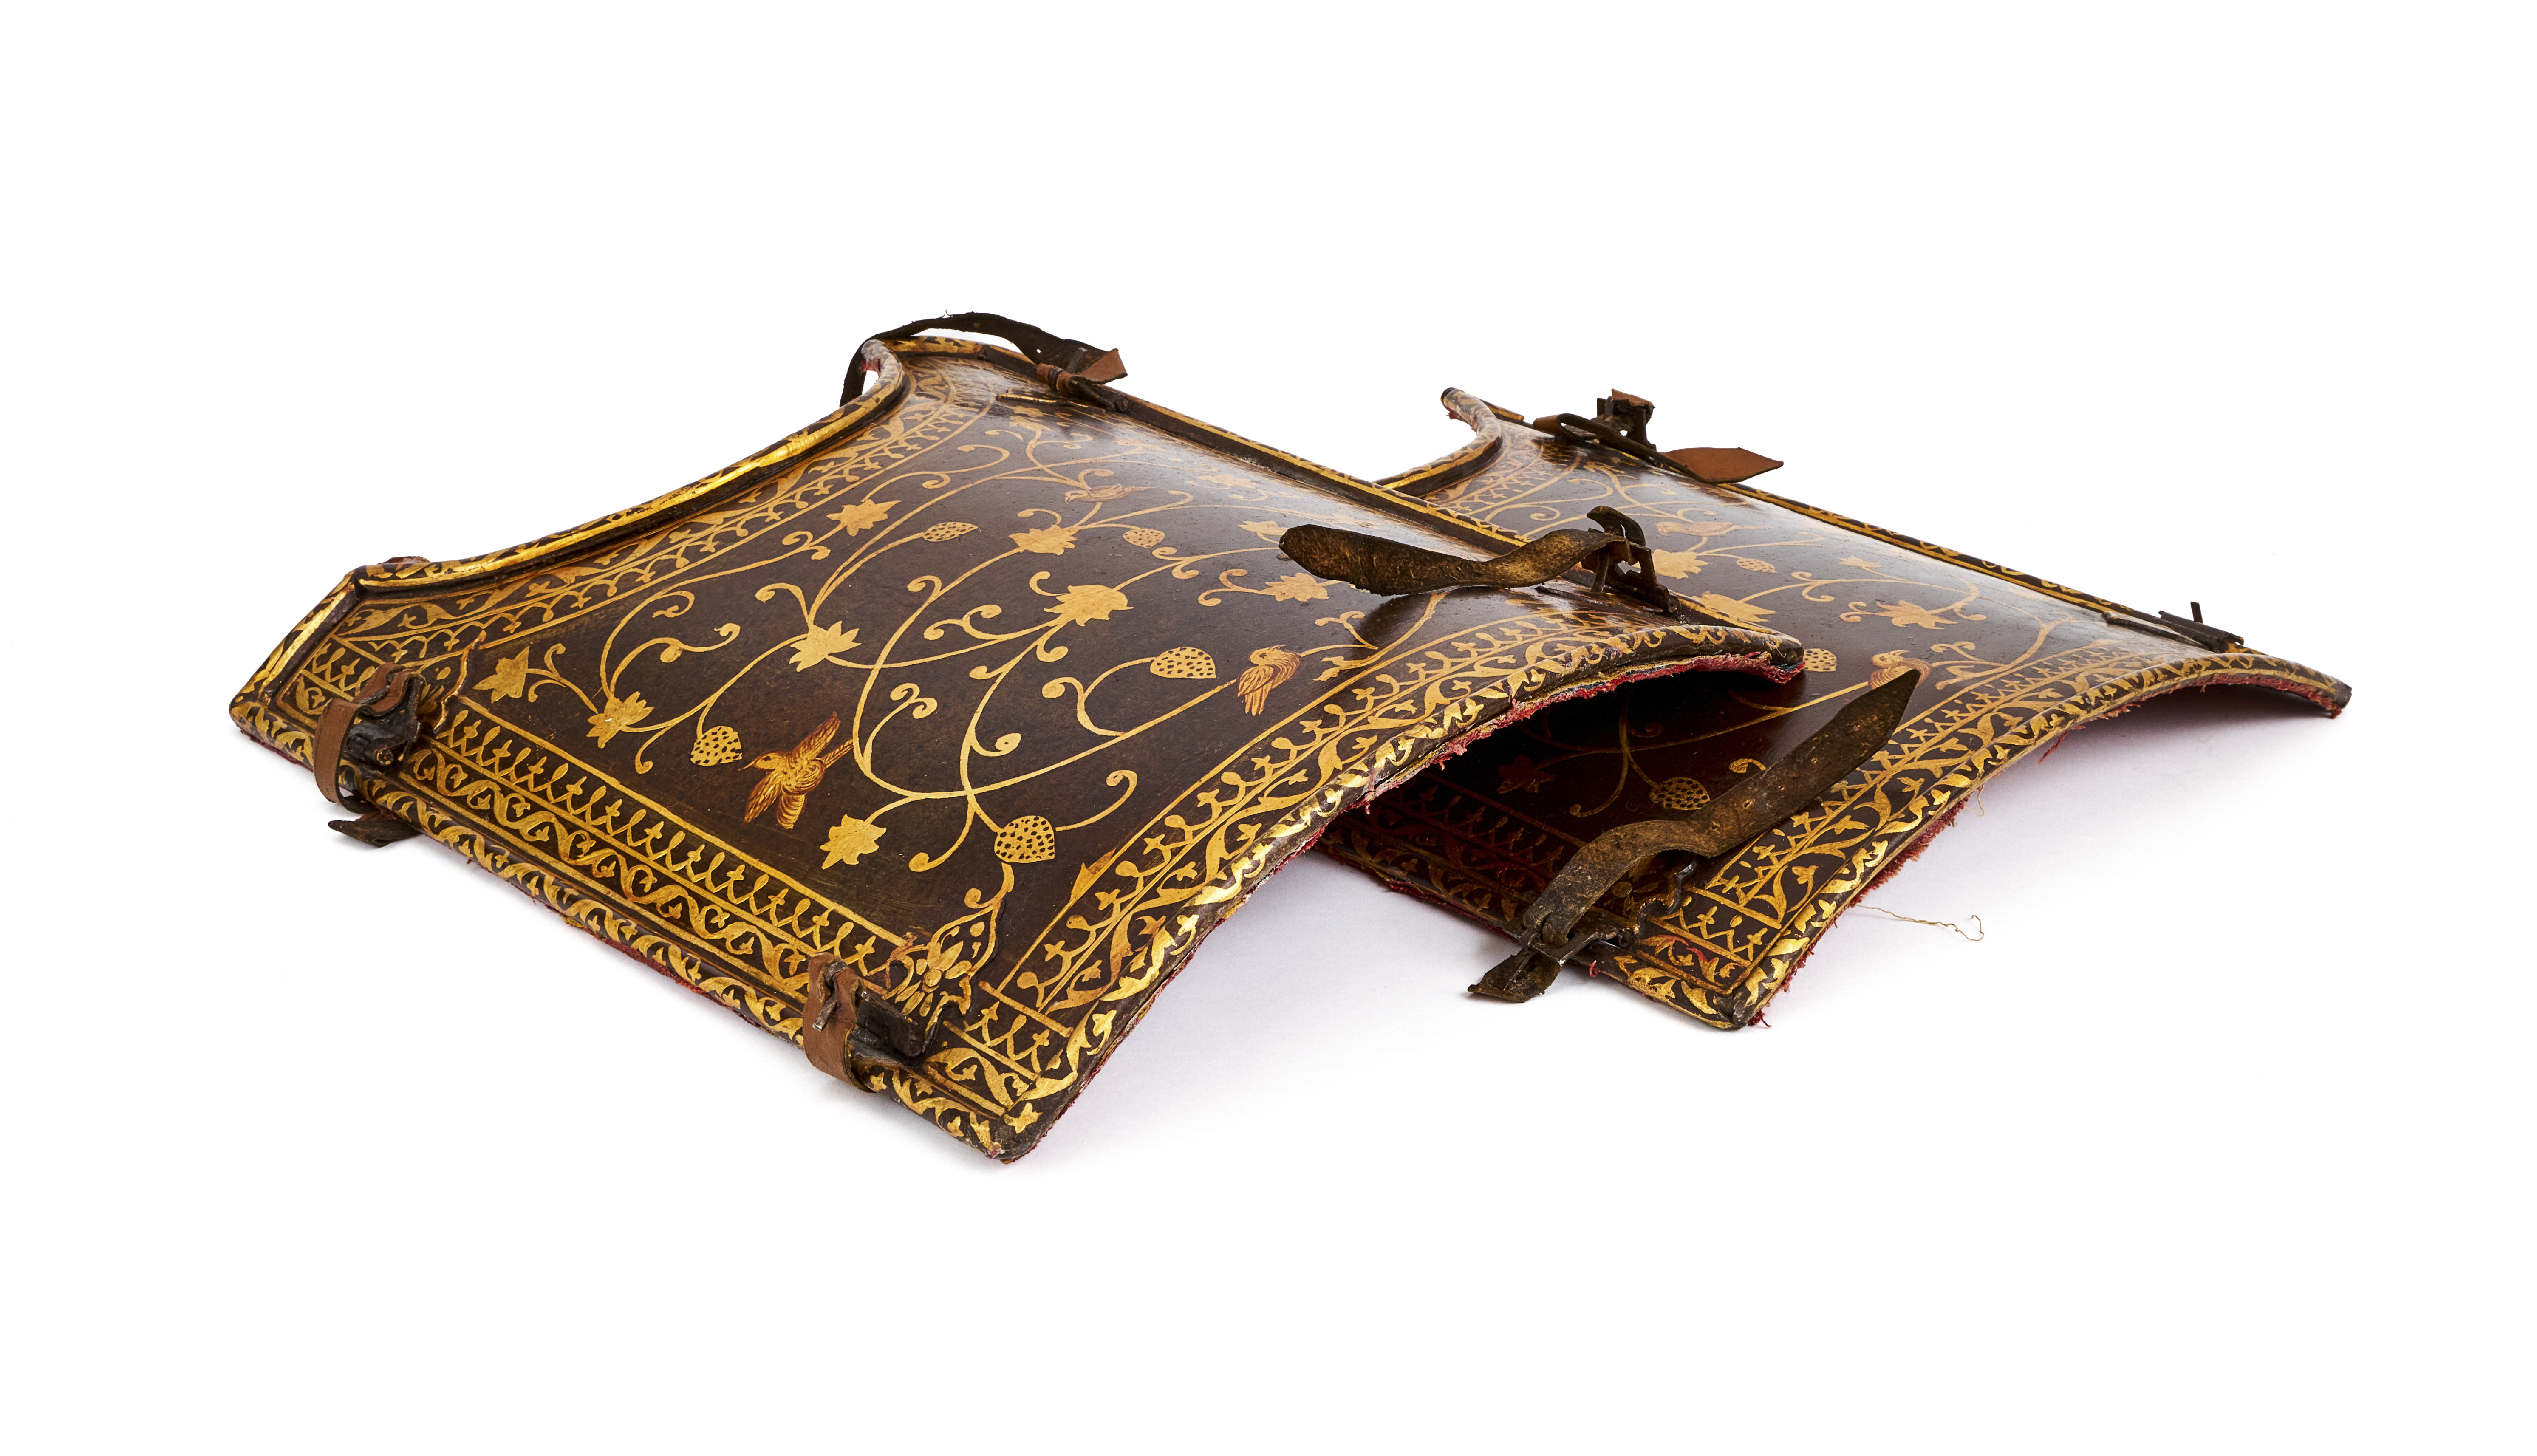 A PAIR OF GOLD-DAMASCENED STEEL SIDE ARMOUR PLATES, 19TH CENTURY, QAJAR - Image 4 of 6